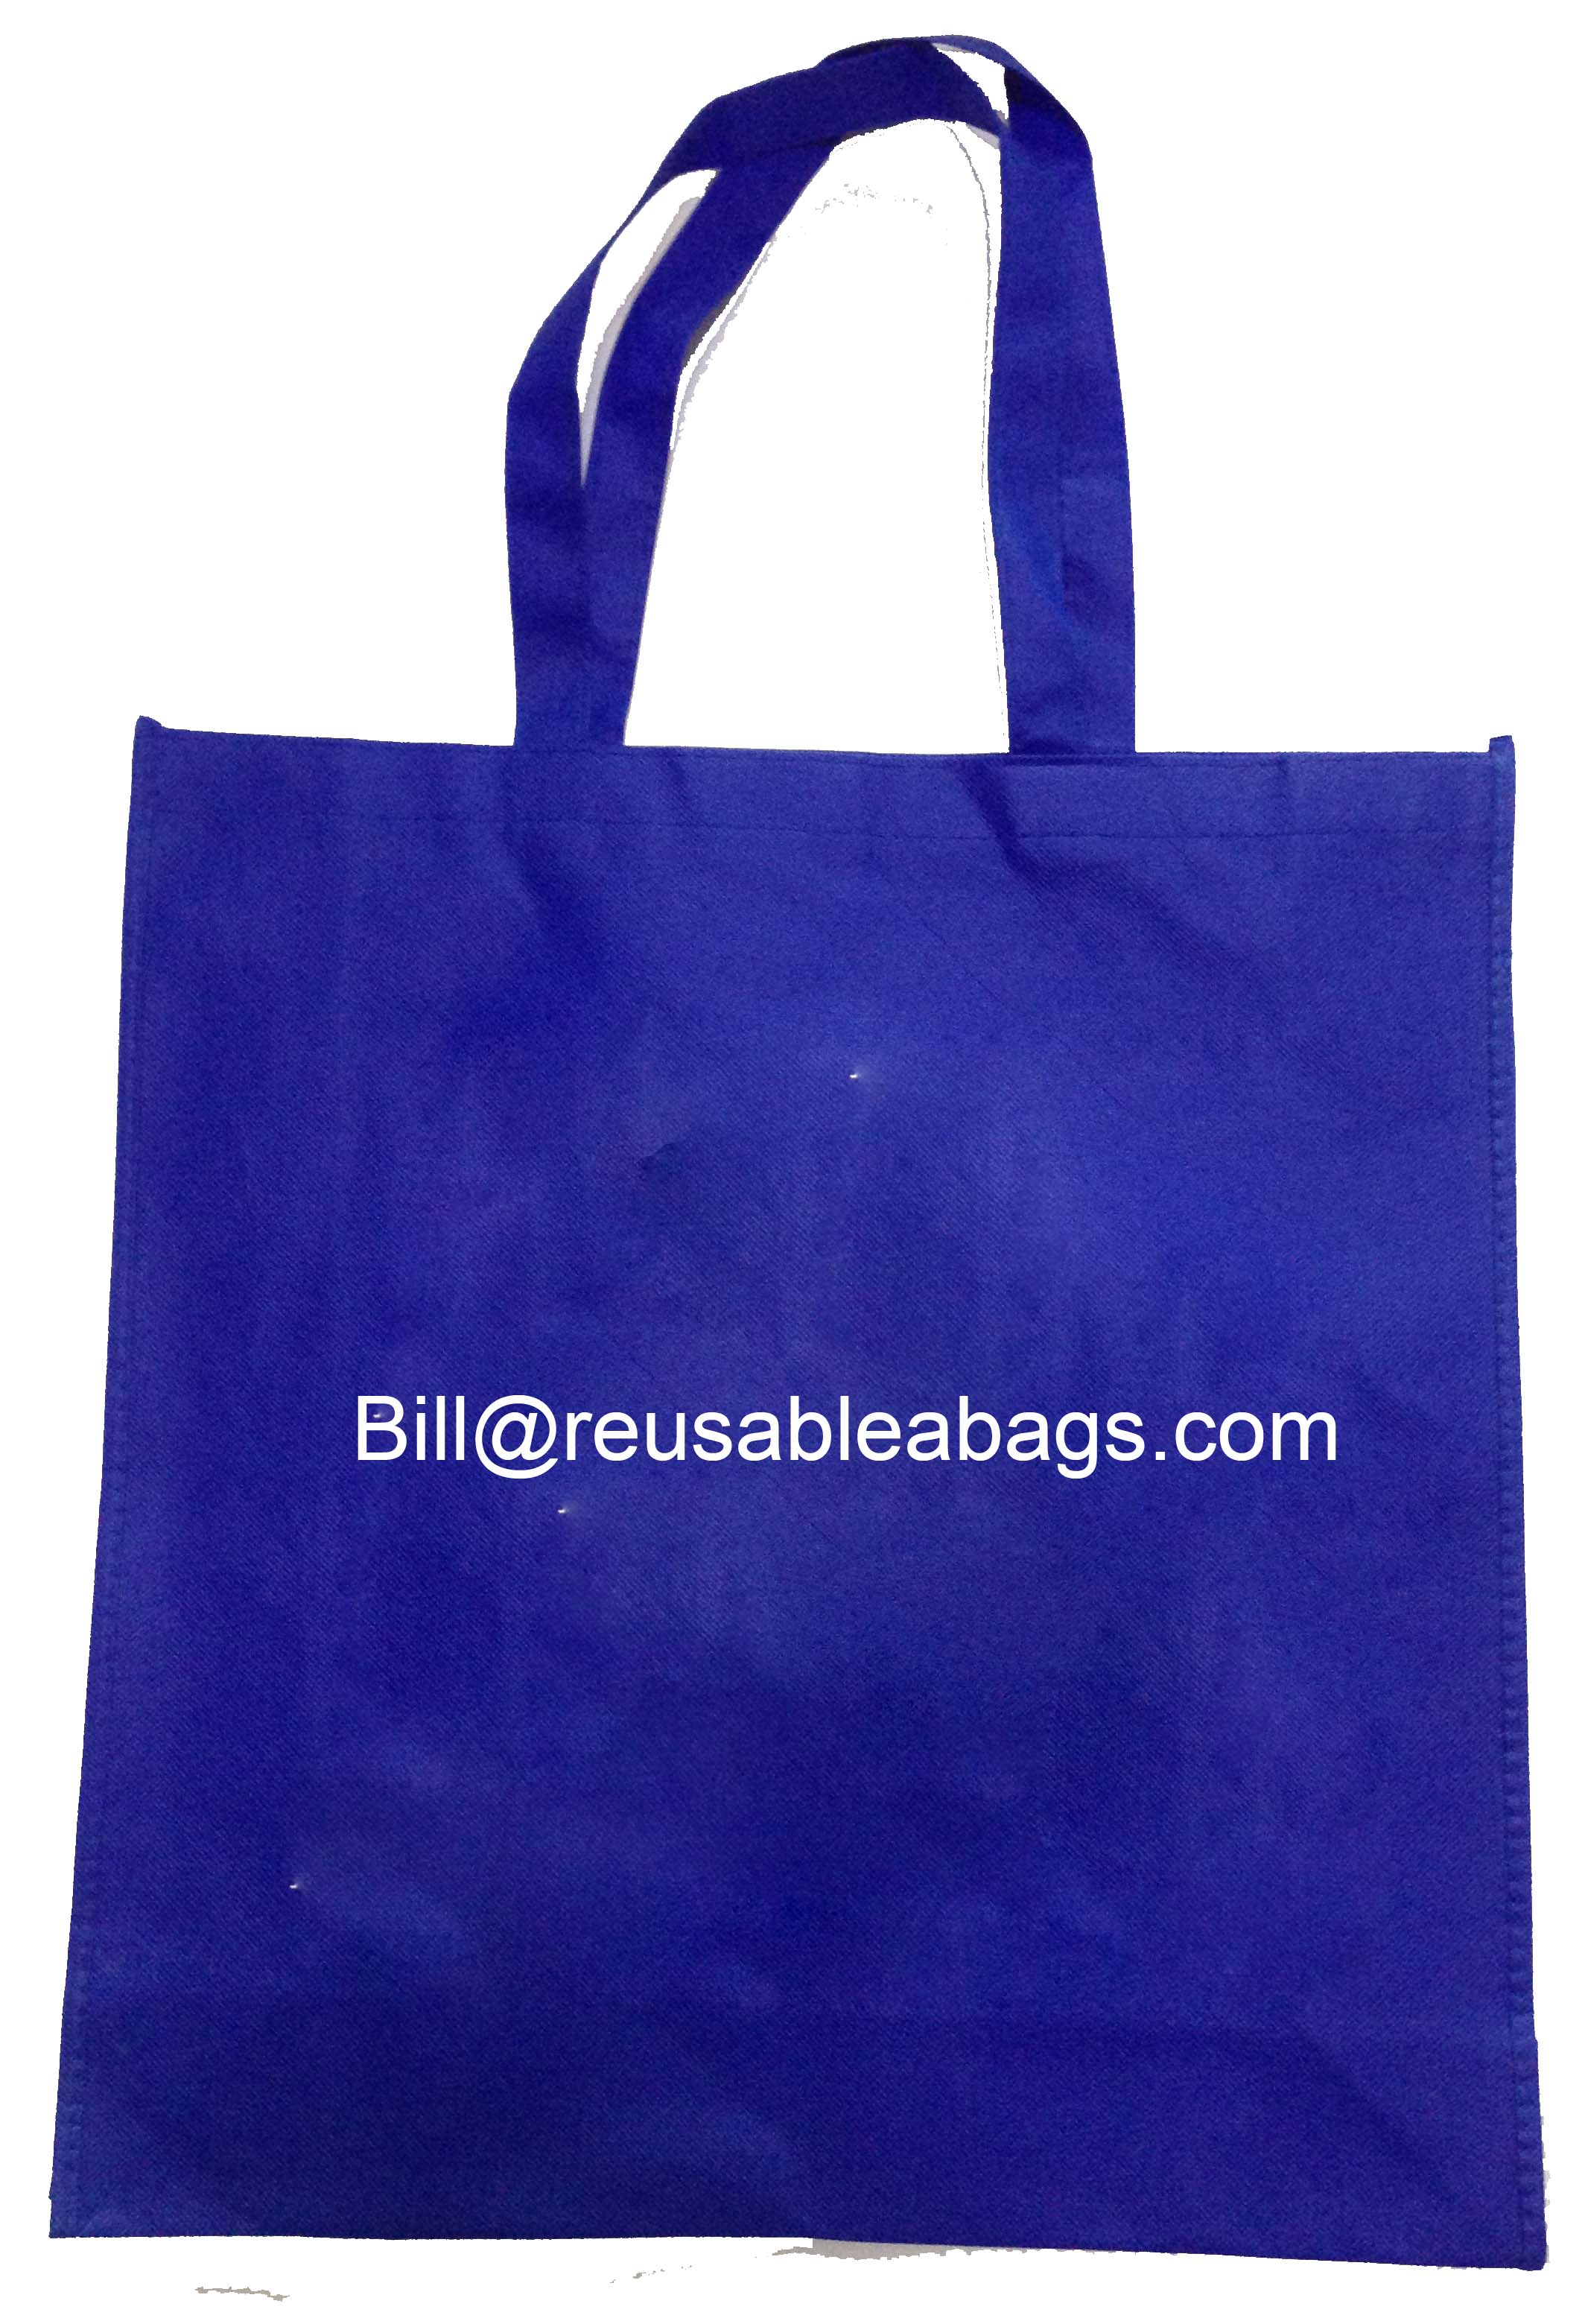 Promotional Bags Personalized wLogo